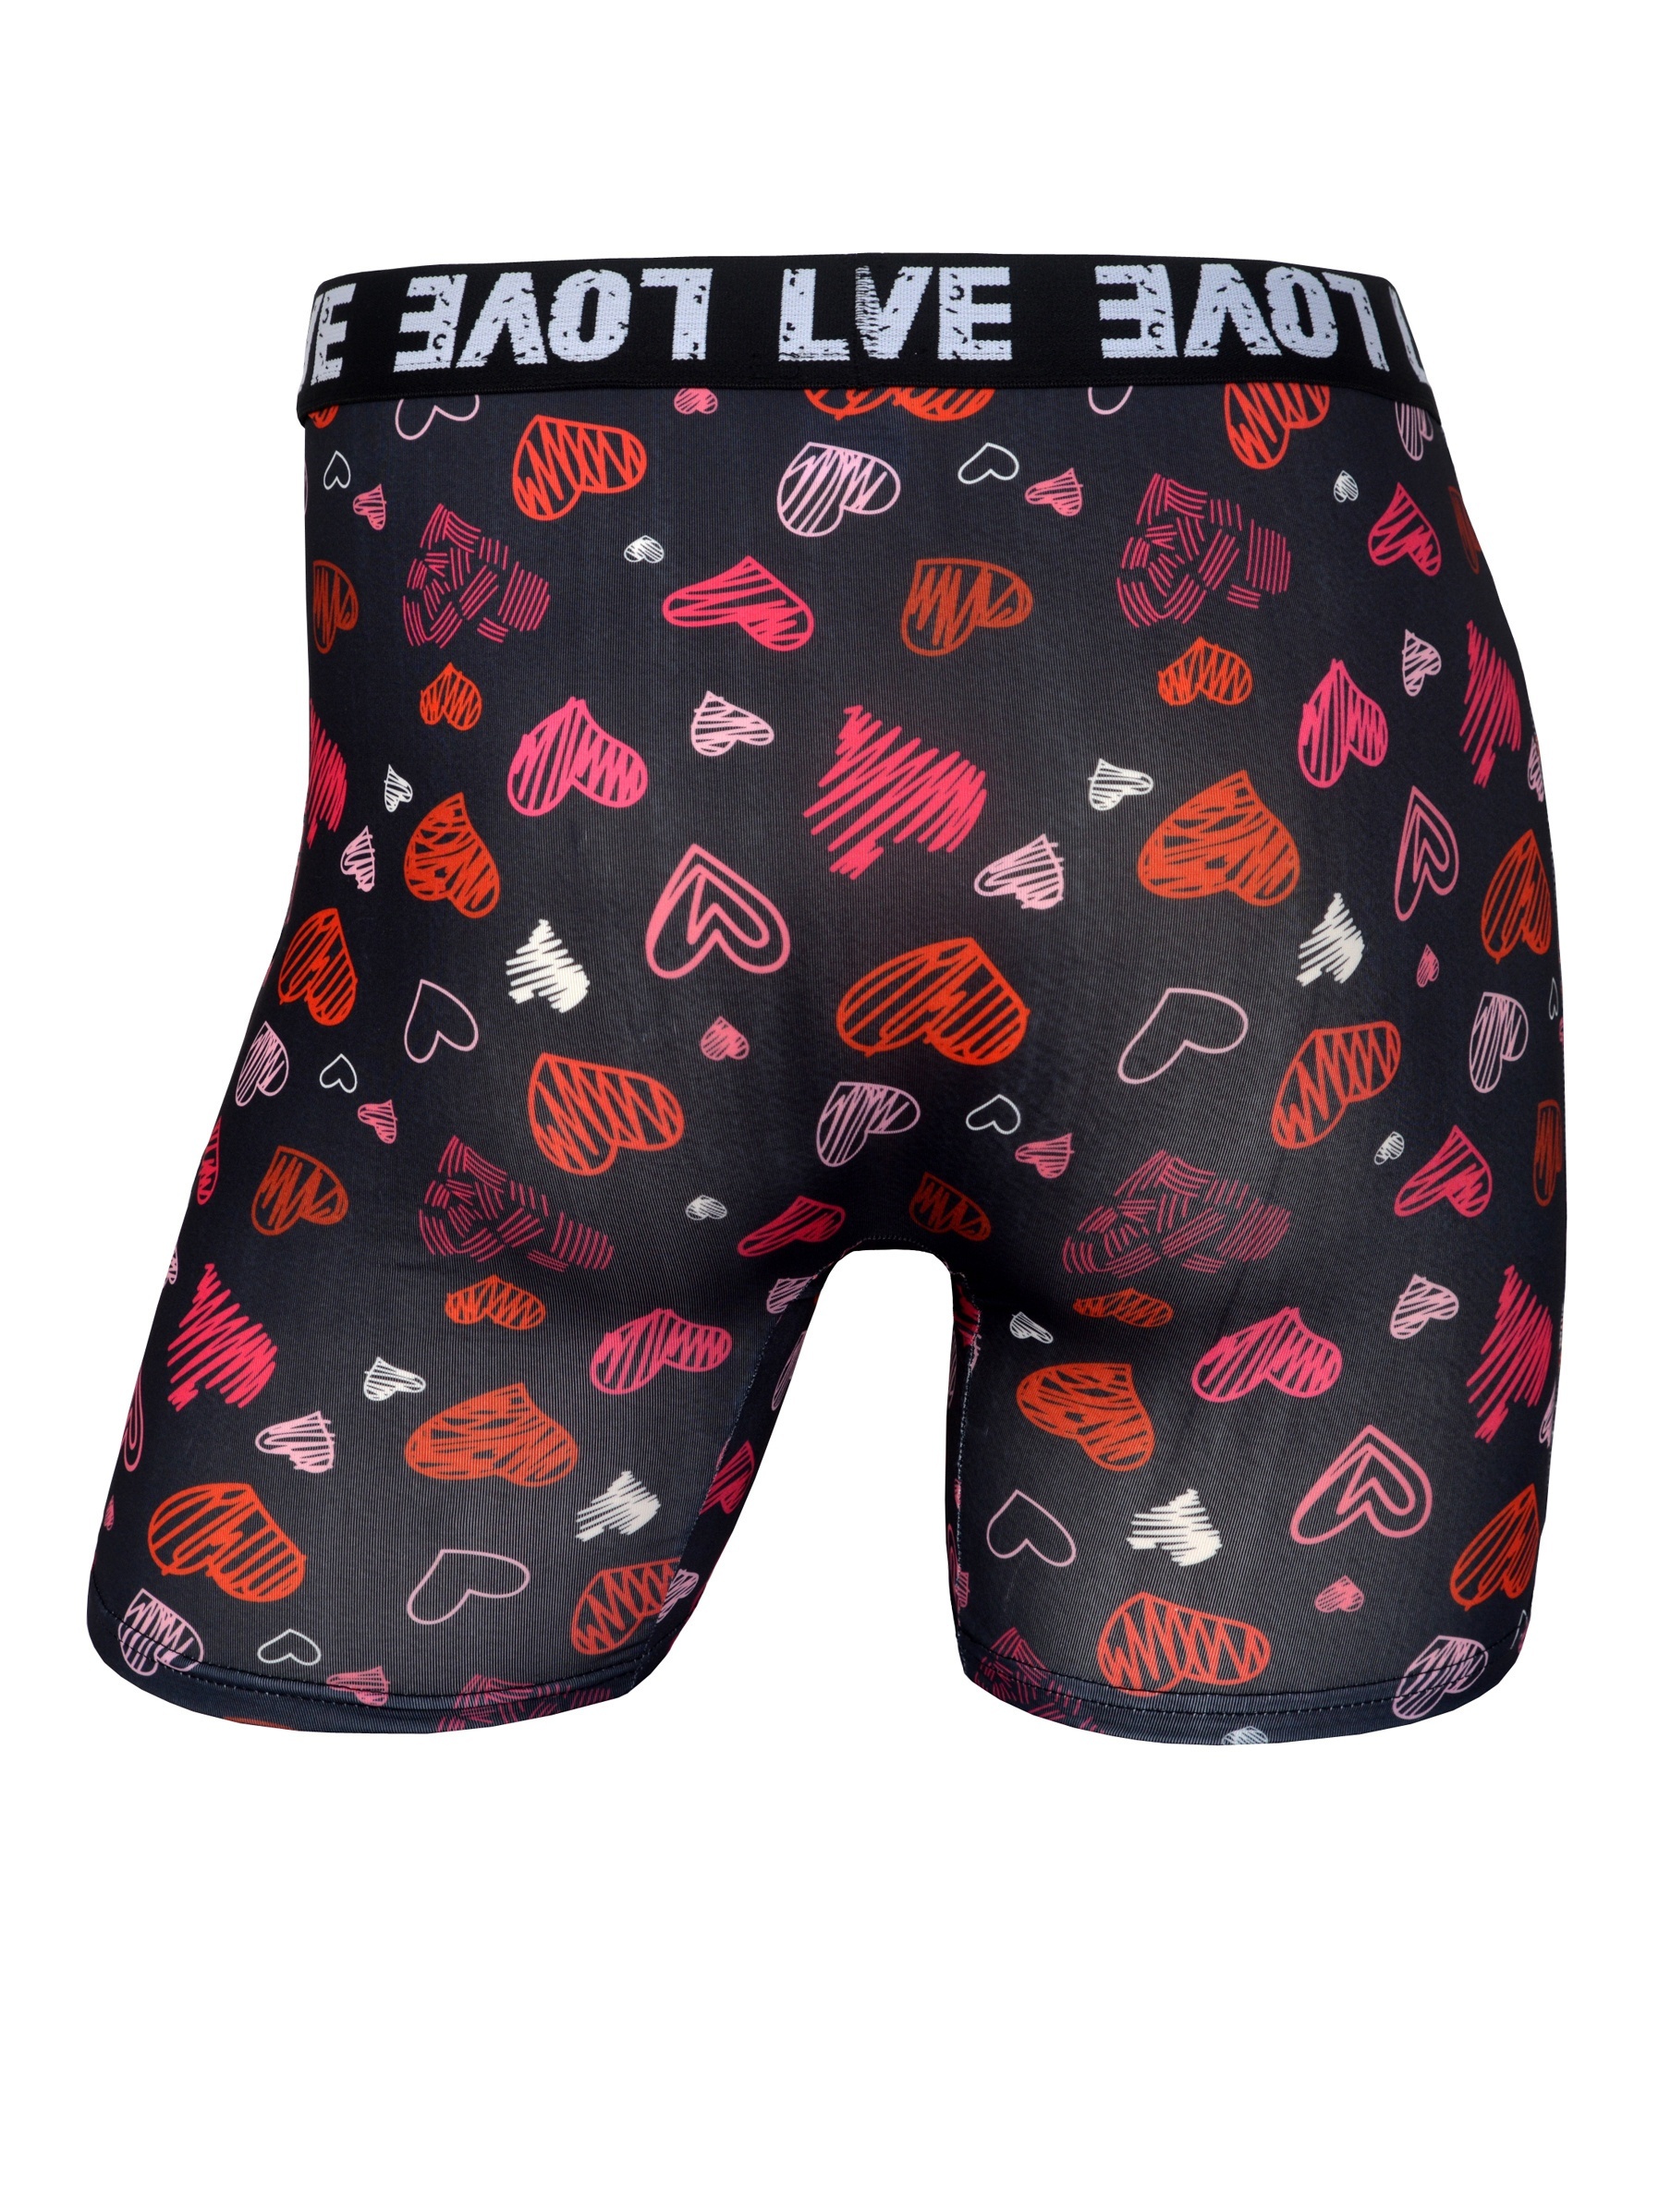 Men's Underwear, Heart Print Fashion Breathable Comfy High Stretch Boxer  Briefs Shorts, Swim Trunks For Beach Pool, Valentine's Day Gifts